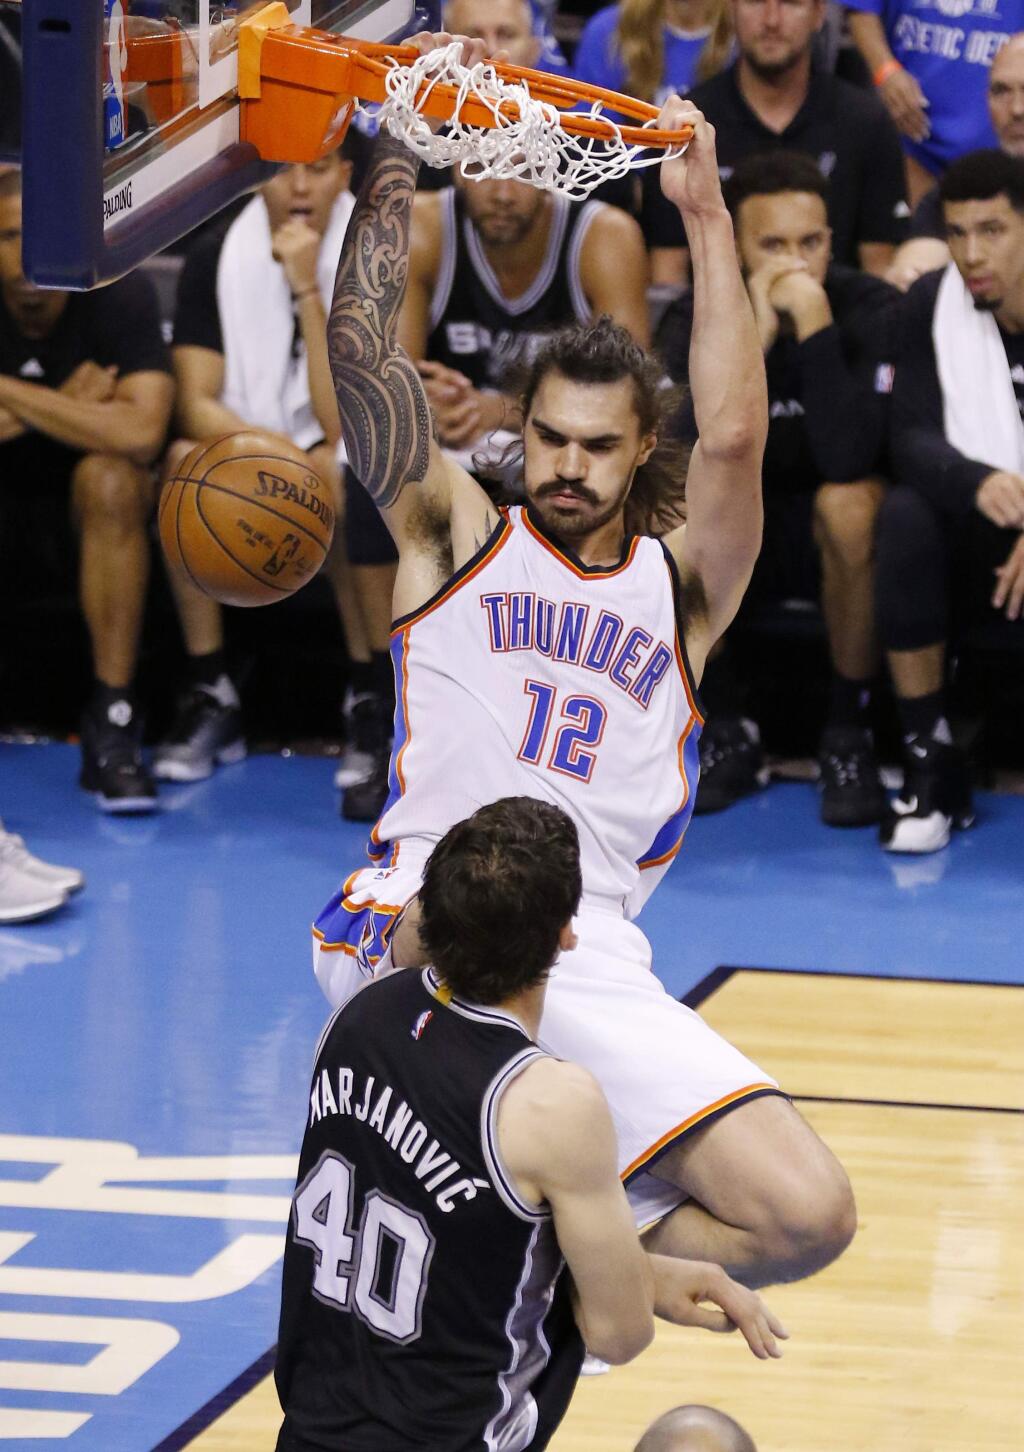 Oklahoma City Thunder center Steven Adams (12) dunks over San Antonio Spurs center Boban Marjanovic (40) in the second quarter of Game 6 of a second-round series in Oklahoma City, Thursday, May 12, 2016. (AP Photo/Alonzo Adams)